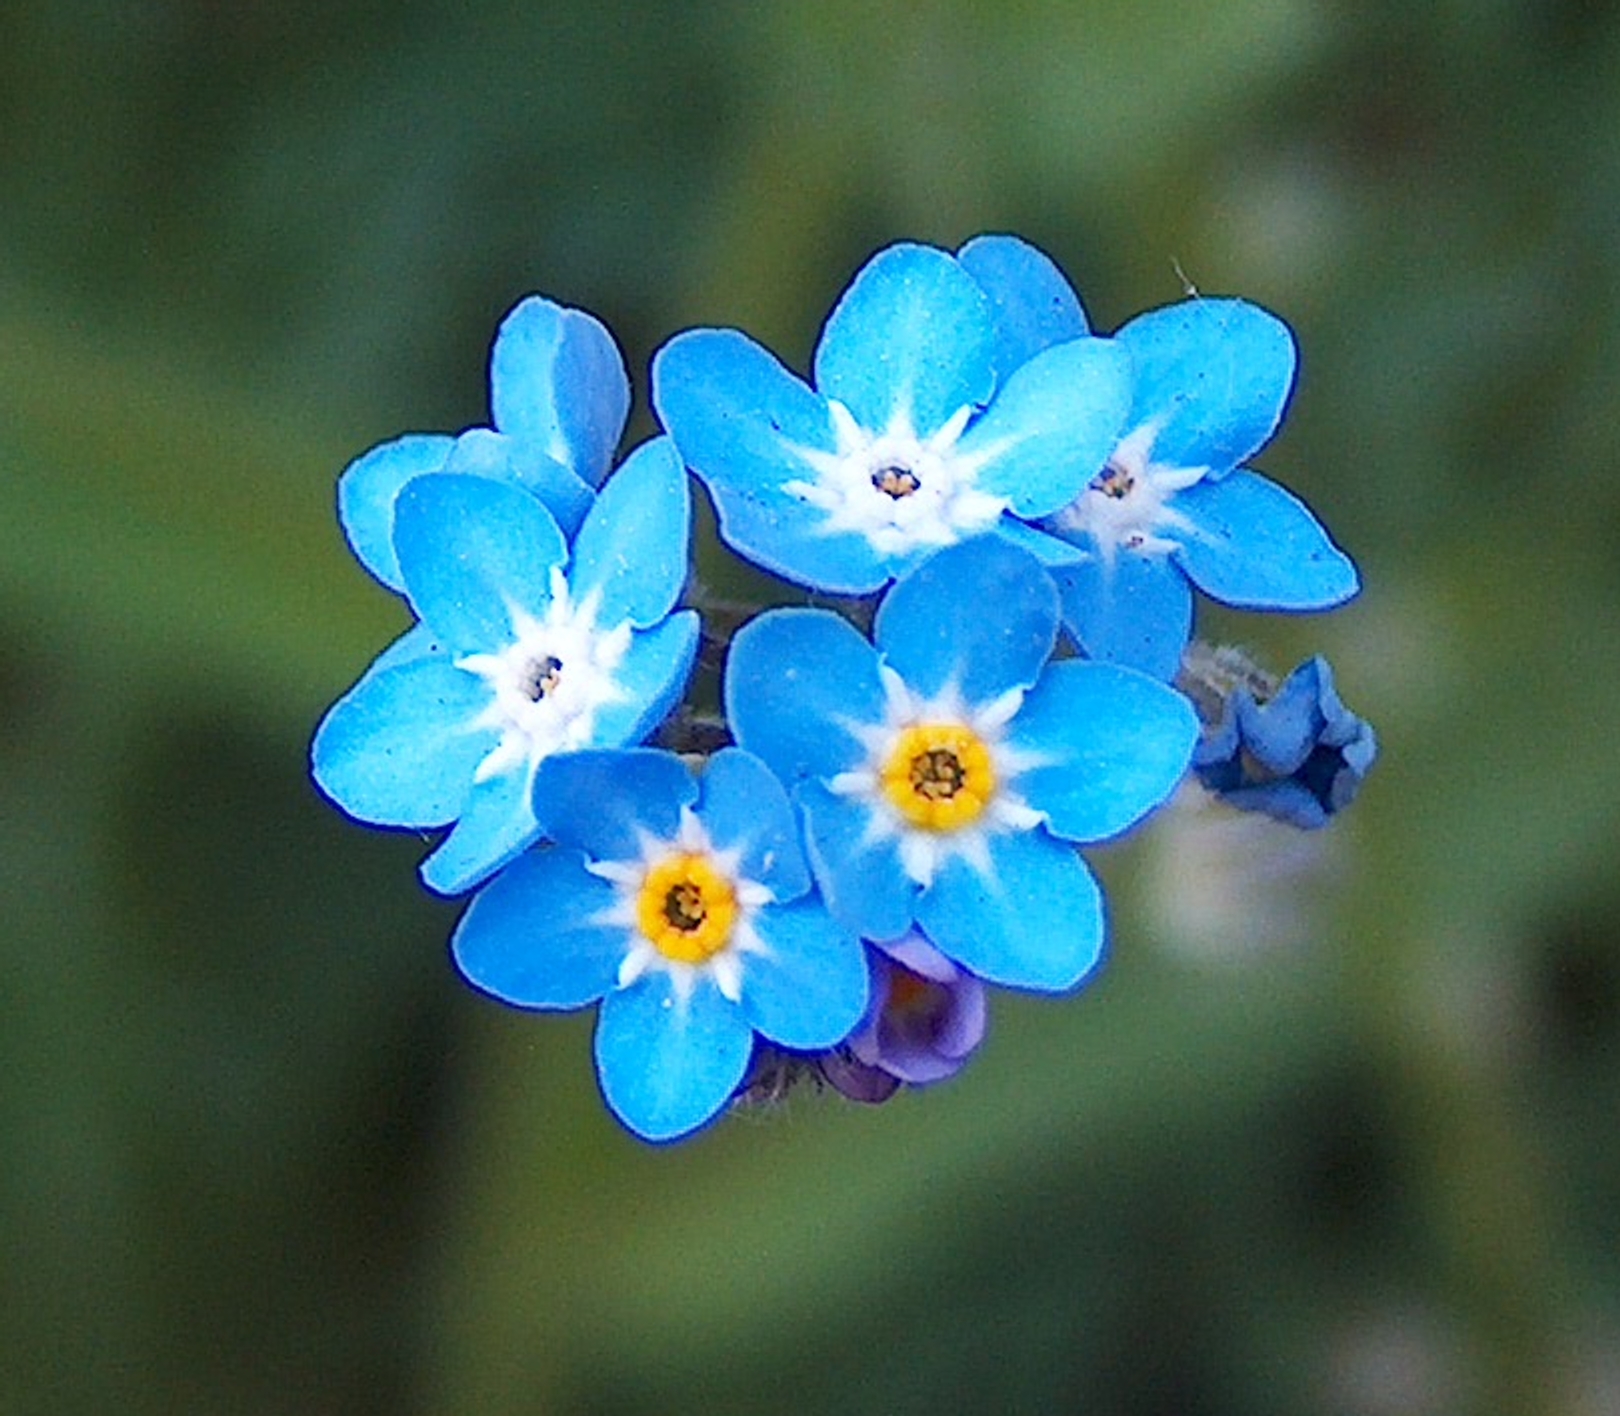 three small blue flowers are in this close up picture